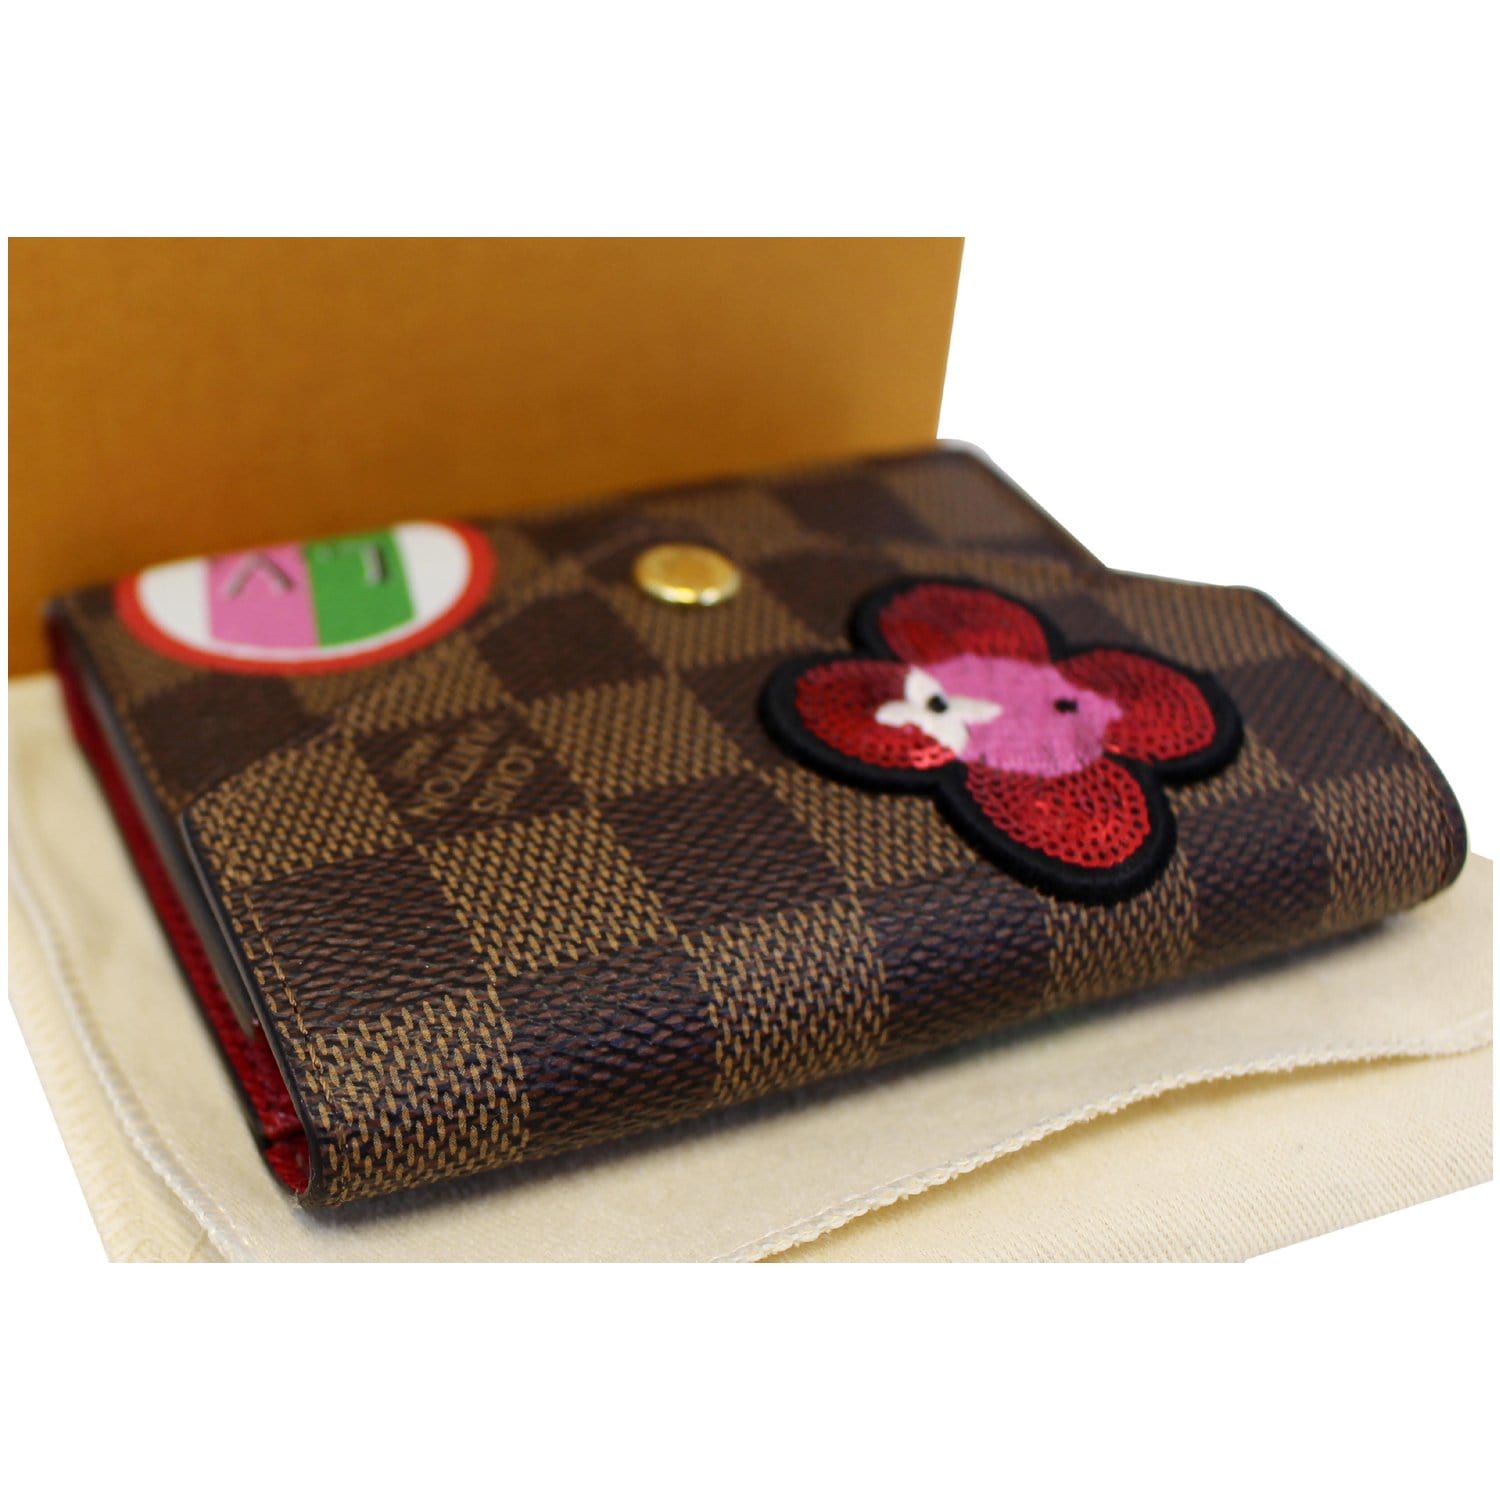 REVIEW] 'LV Wallet Victorine Damier Ebene Wallet from Bag_Wallet, DHGate  (no known factory) : r/WagoonLadies